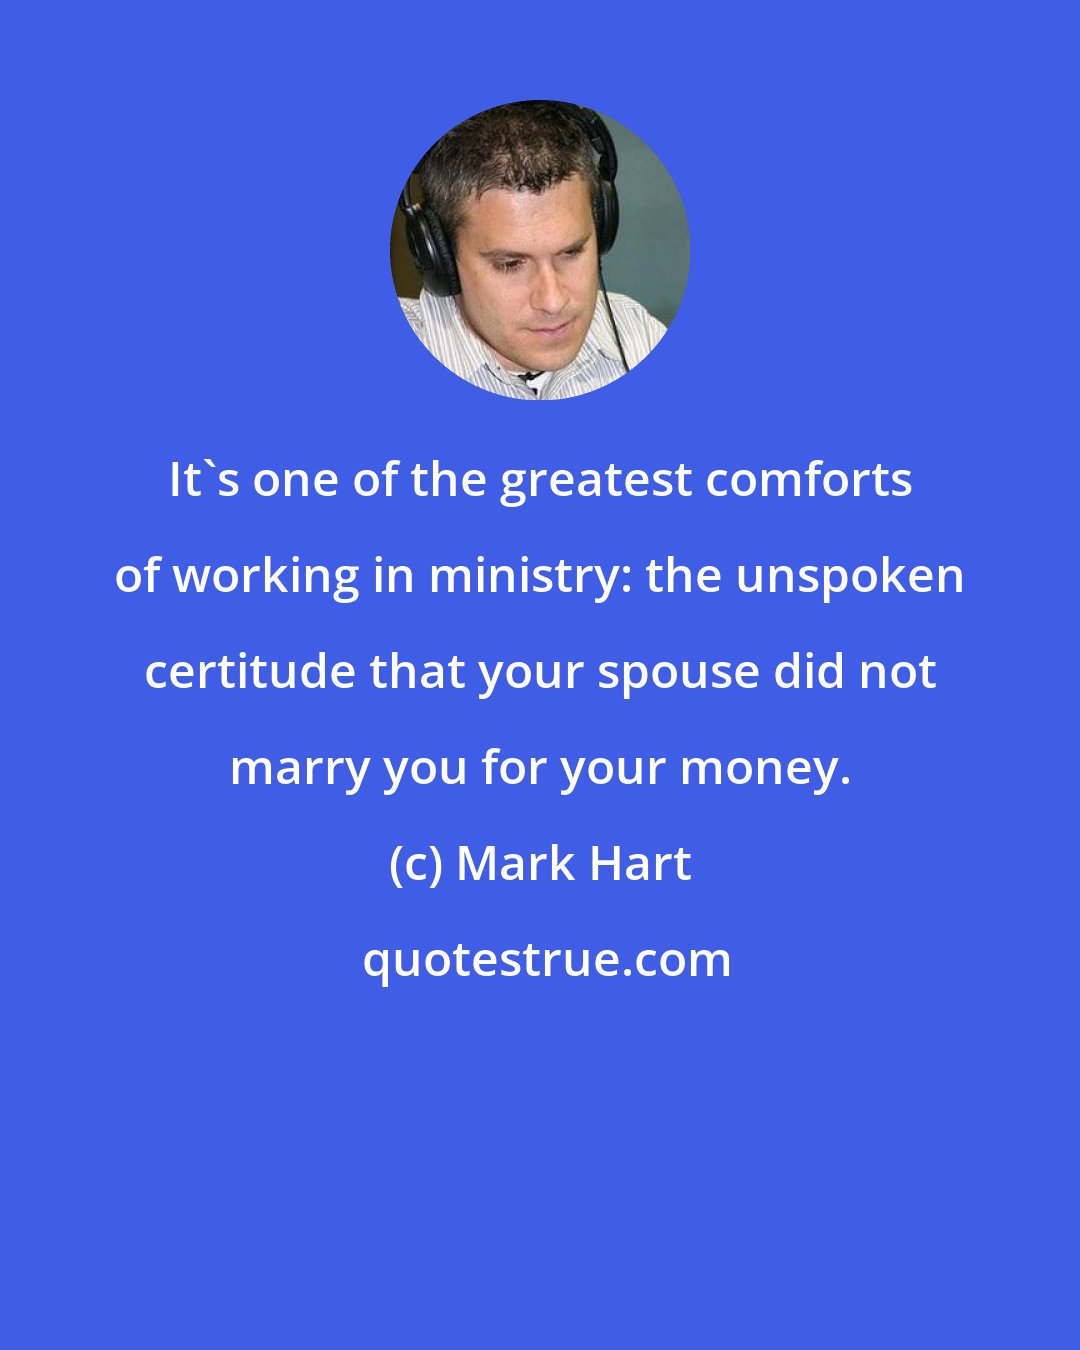 Mark Hart: It's one of the greatest comforts of working in ministry: the unspoken certitude that your spouse did not marry you for your money.